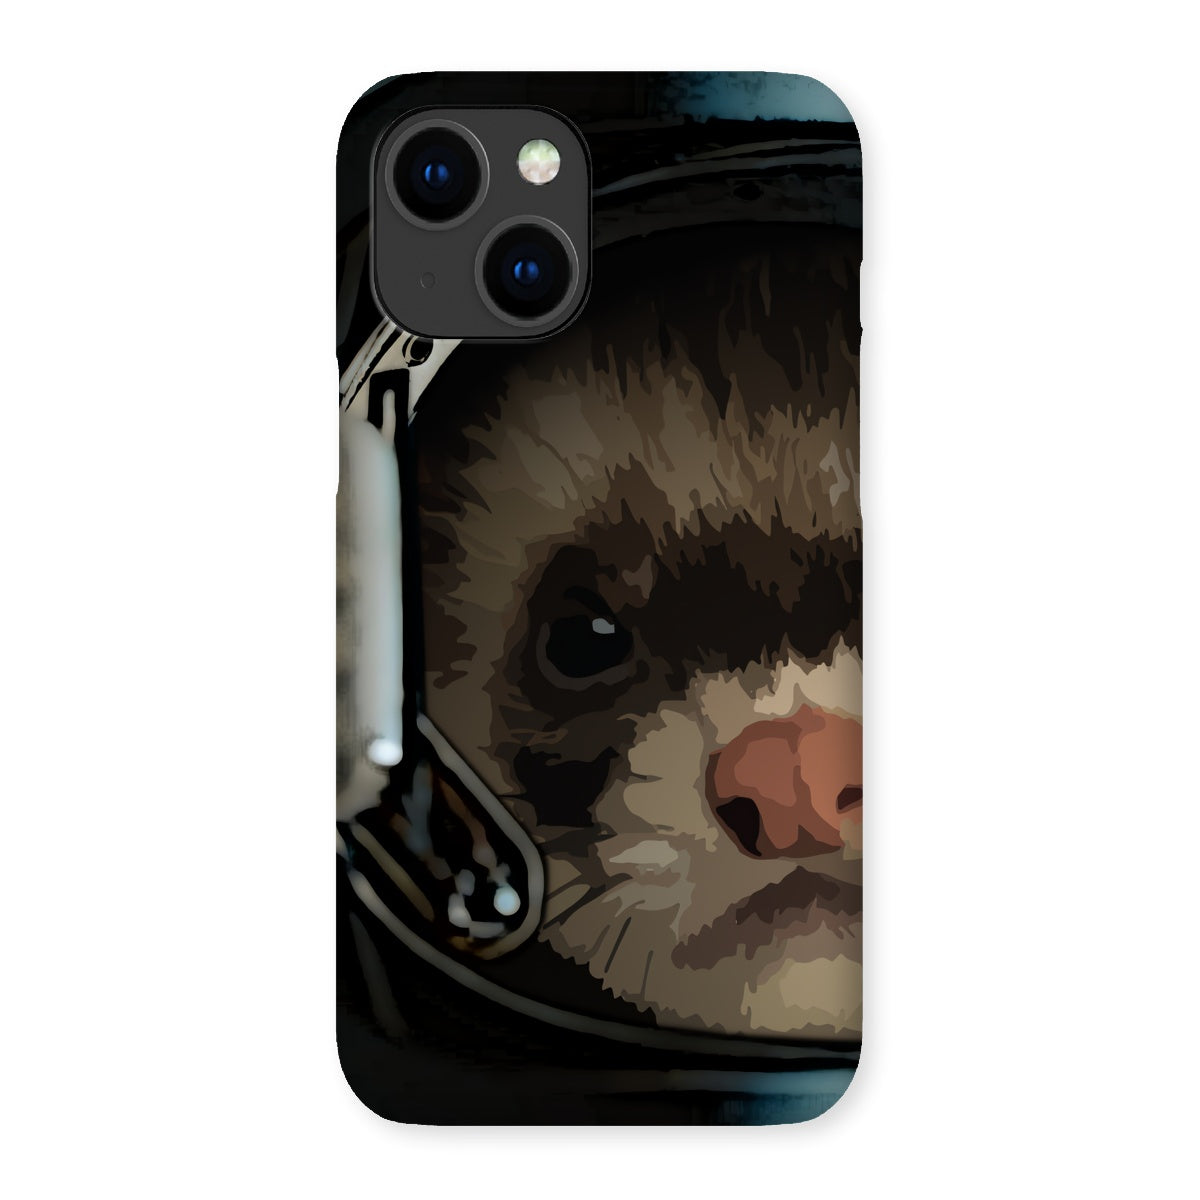 For All Ferretkind Snap Phone Case